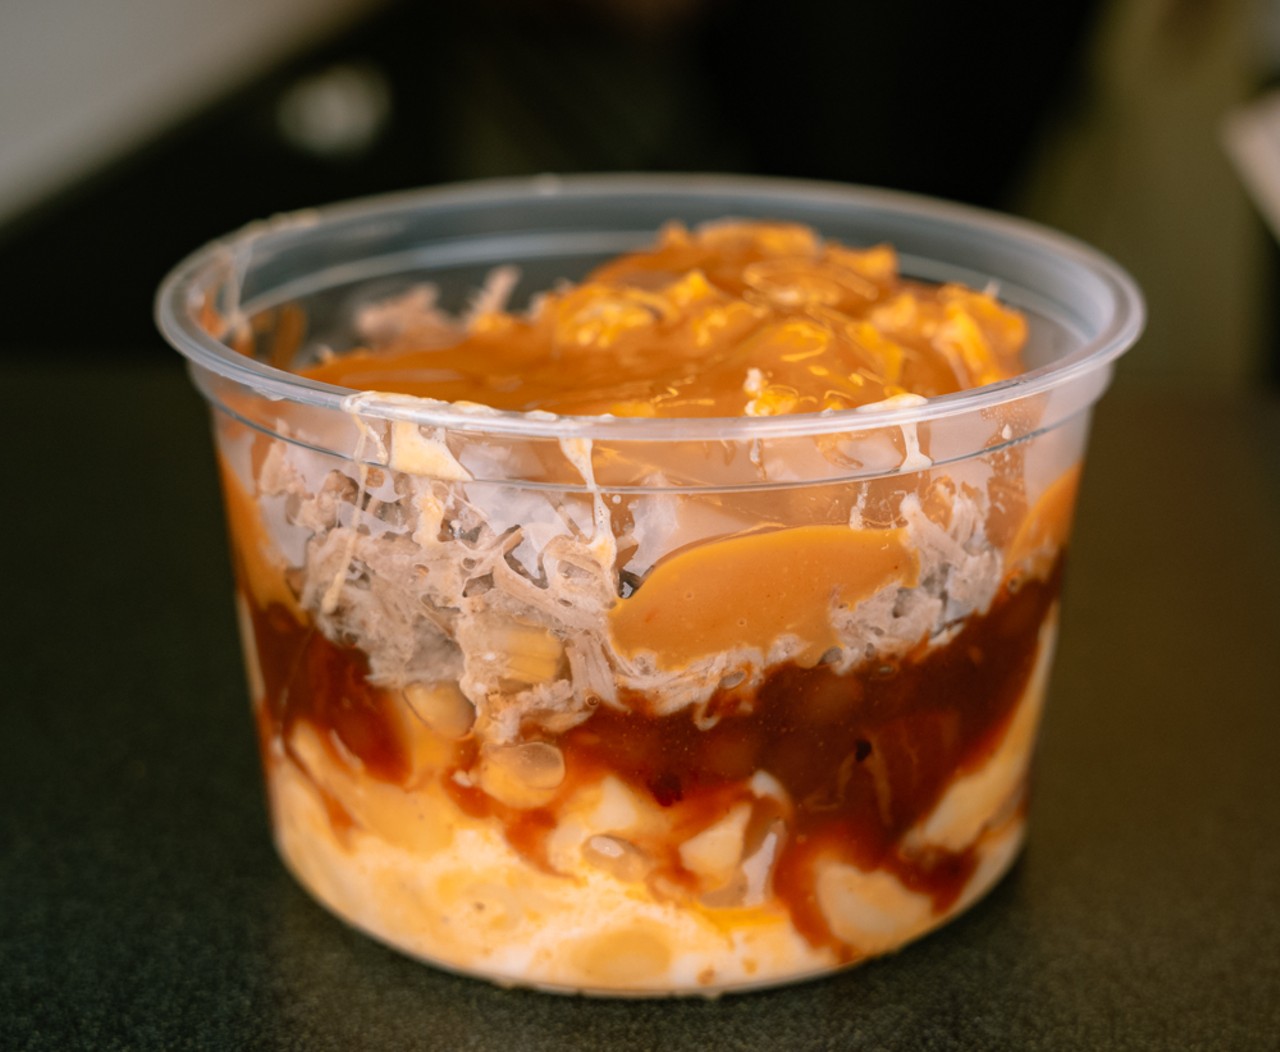 Smokin' Dews' The Piggy Pileup features four ounces of their homemade macaroni and cheese, baked beans and two ounces of pulled pork or chicken smothered in your choice of sauce, all piled on top of one another.